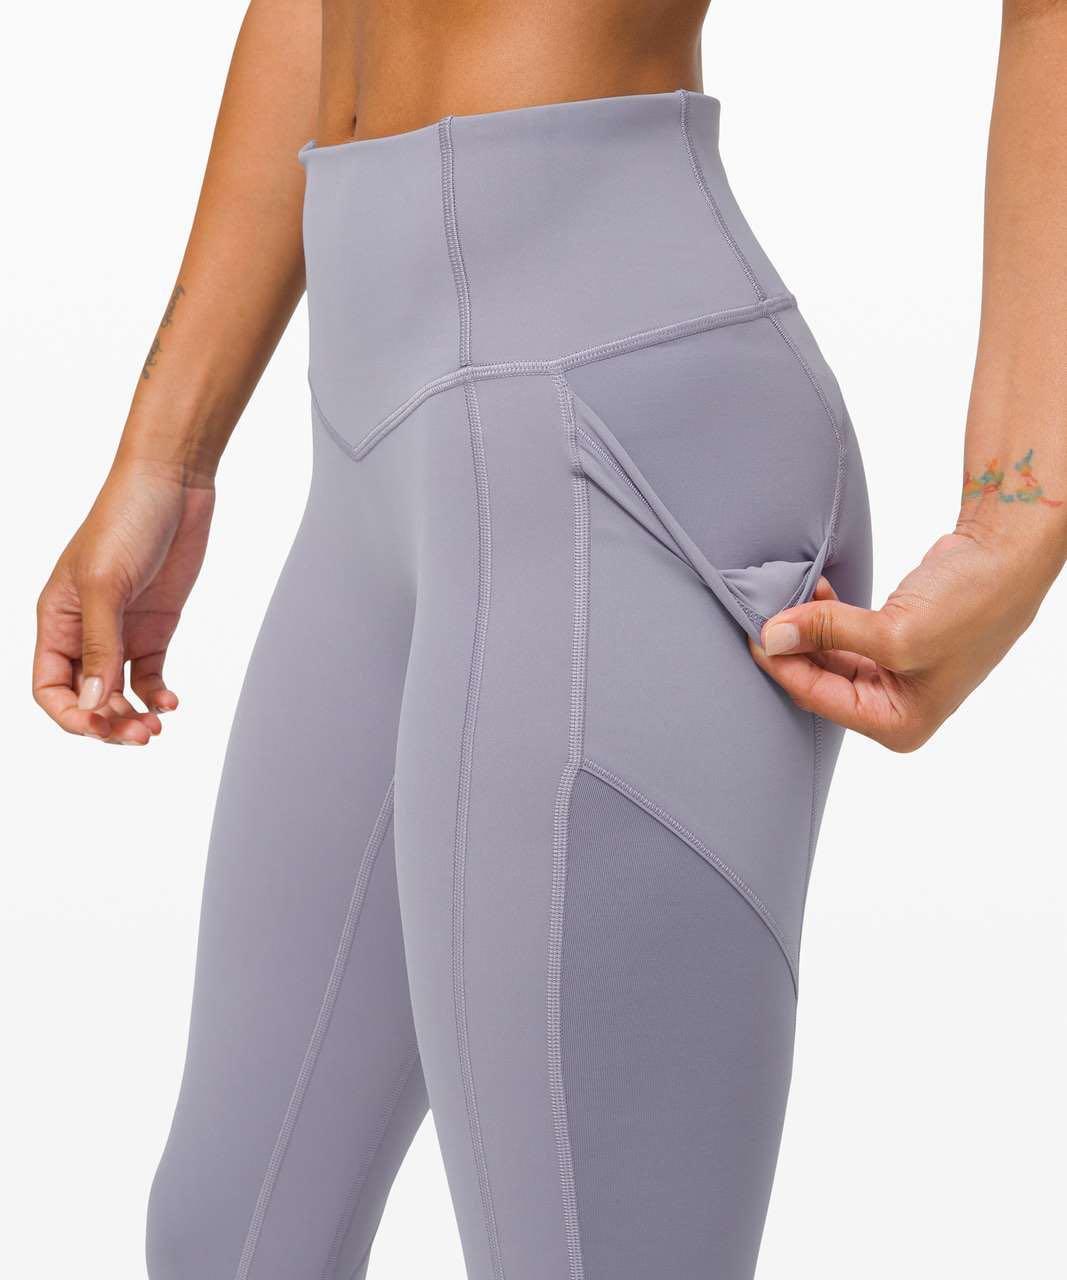 Lululemon All the Right Places US 4, Women's Fashion, Activewear